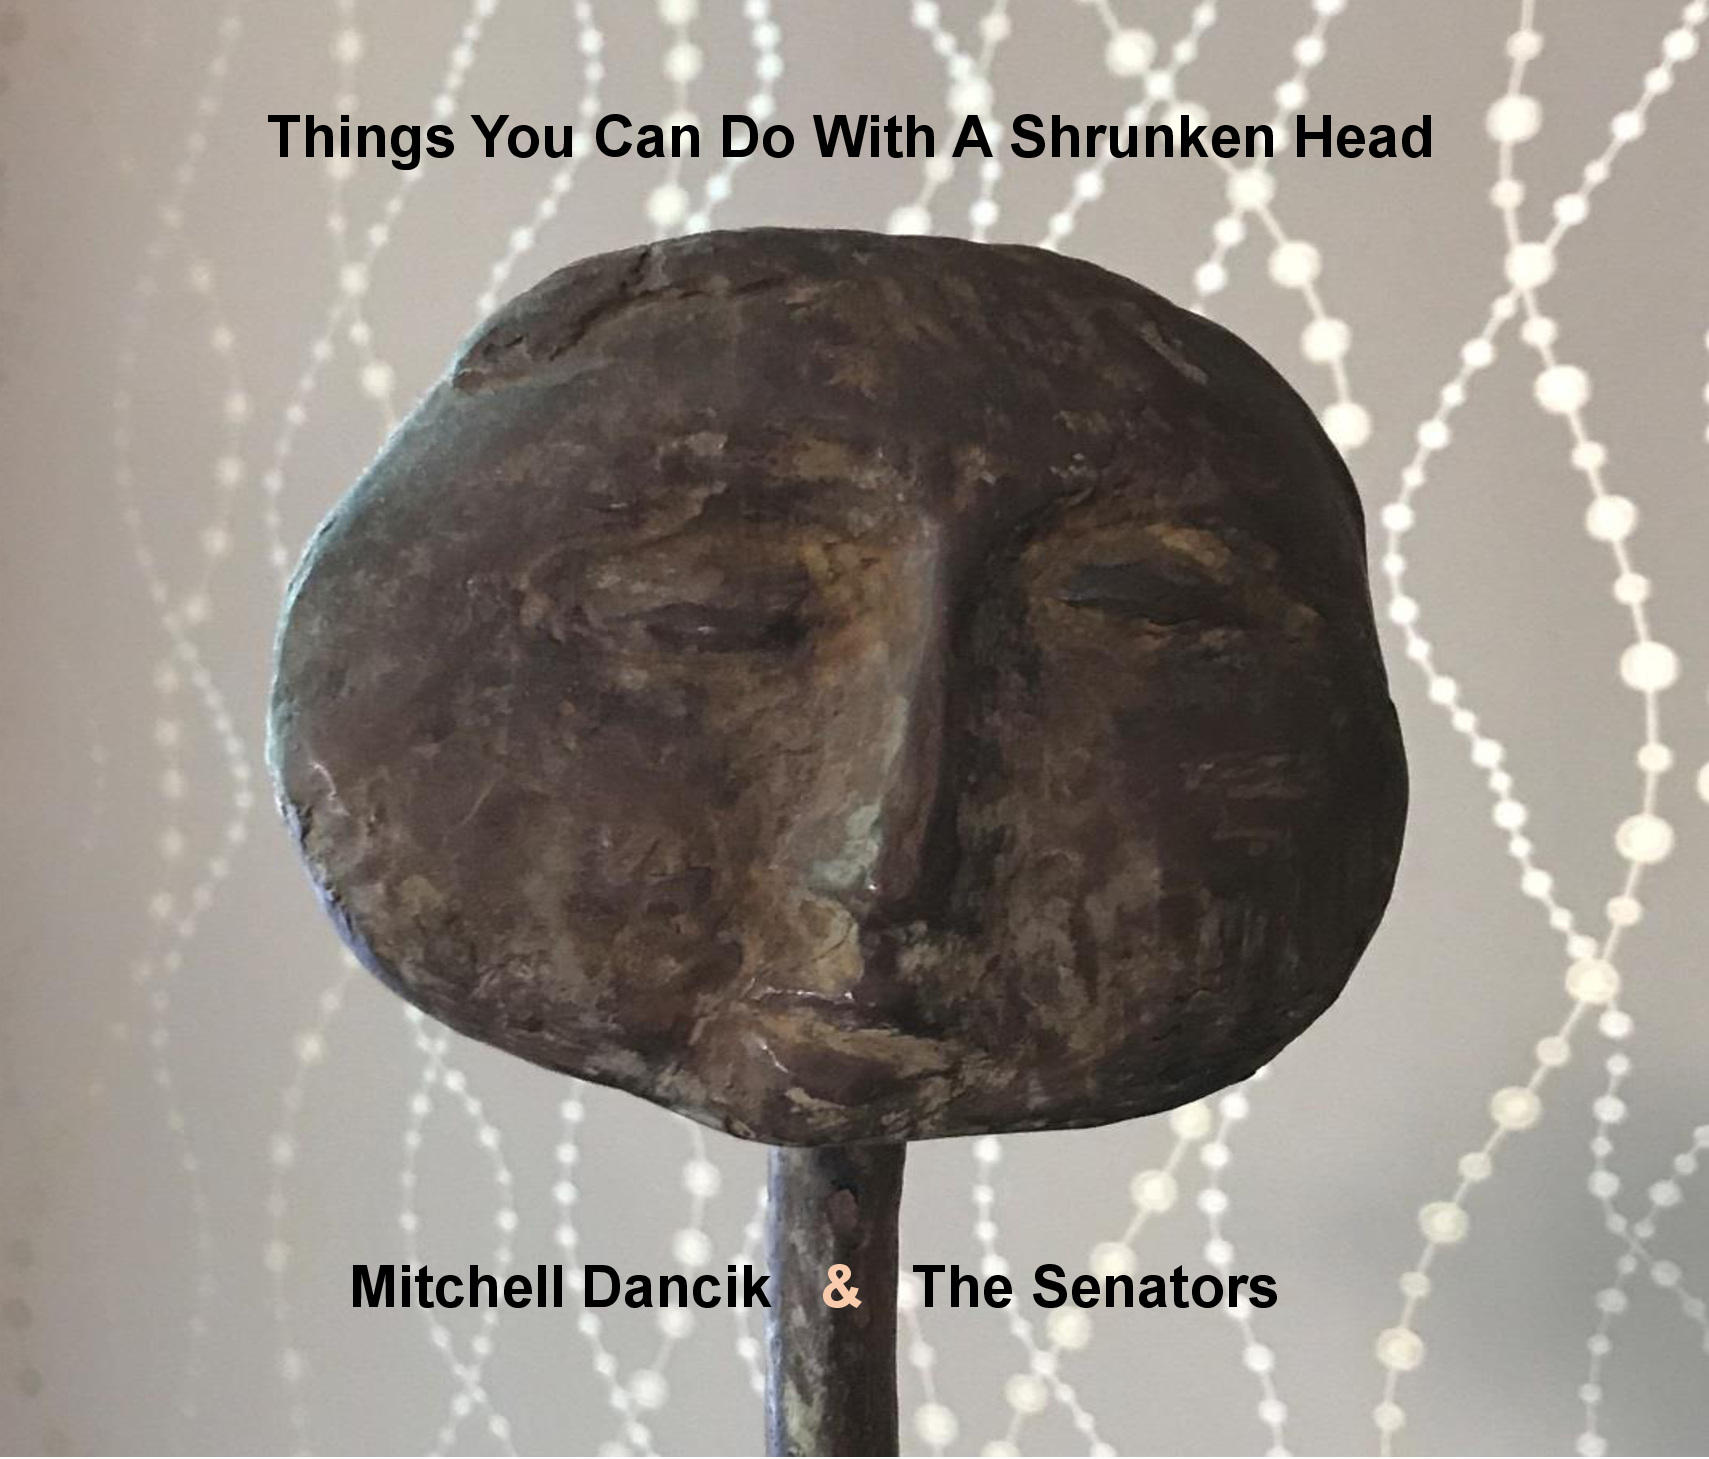 Things You Can Do with a Shrunken Head